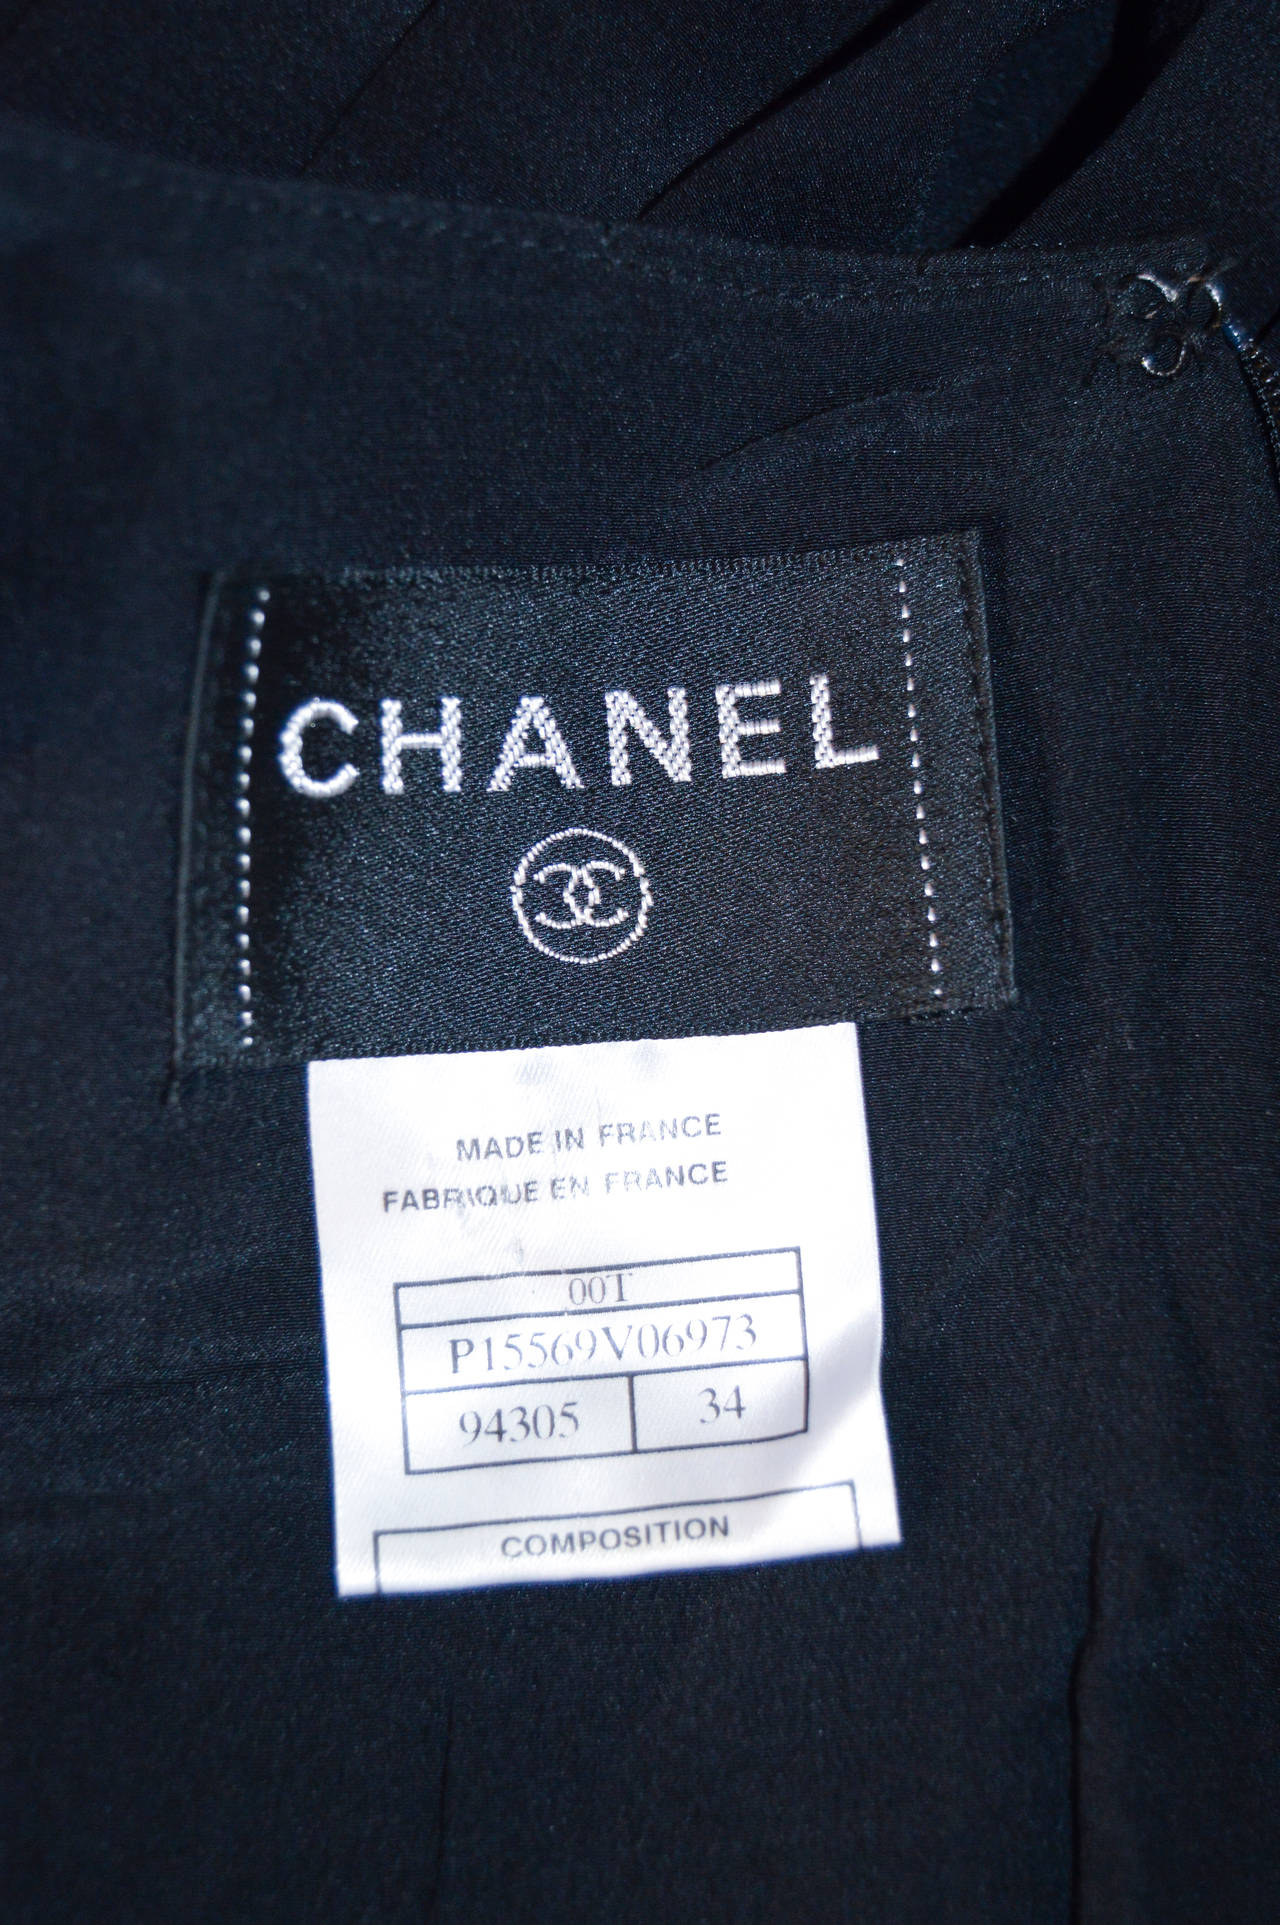 Chanel Black Silk Dress with Quilted Bodice In Excellent Condition For Sale In Oakland, CA